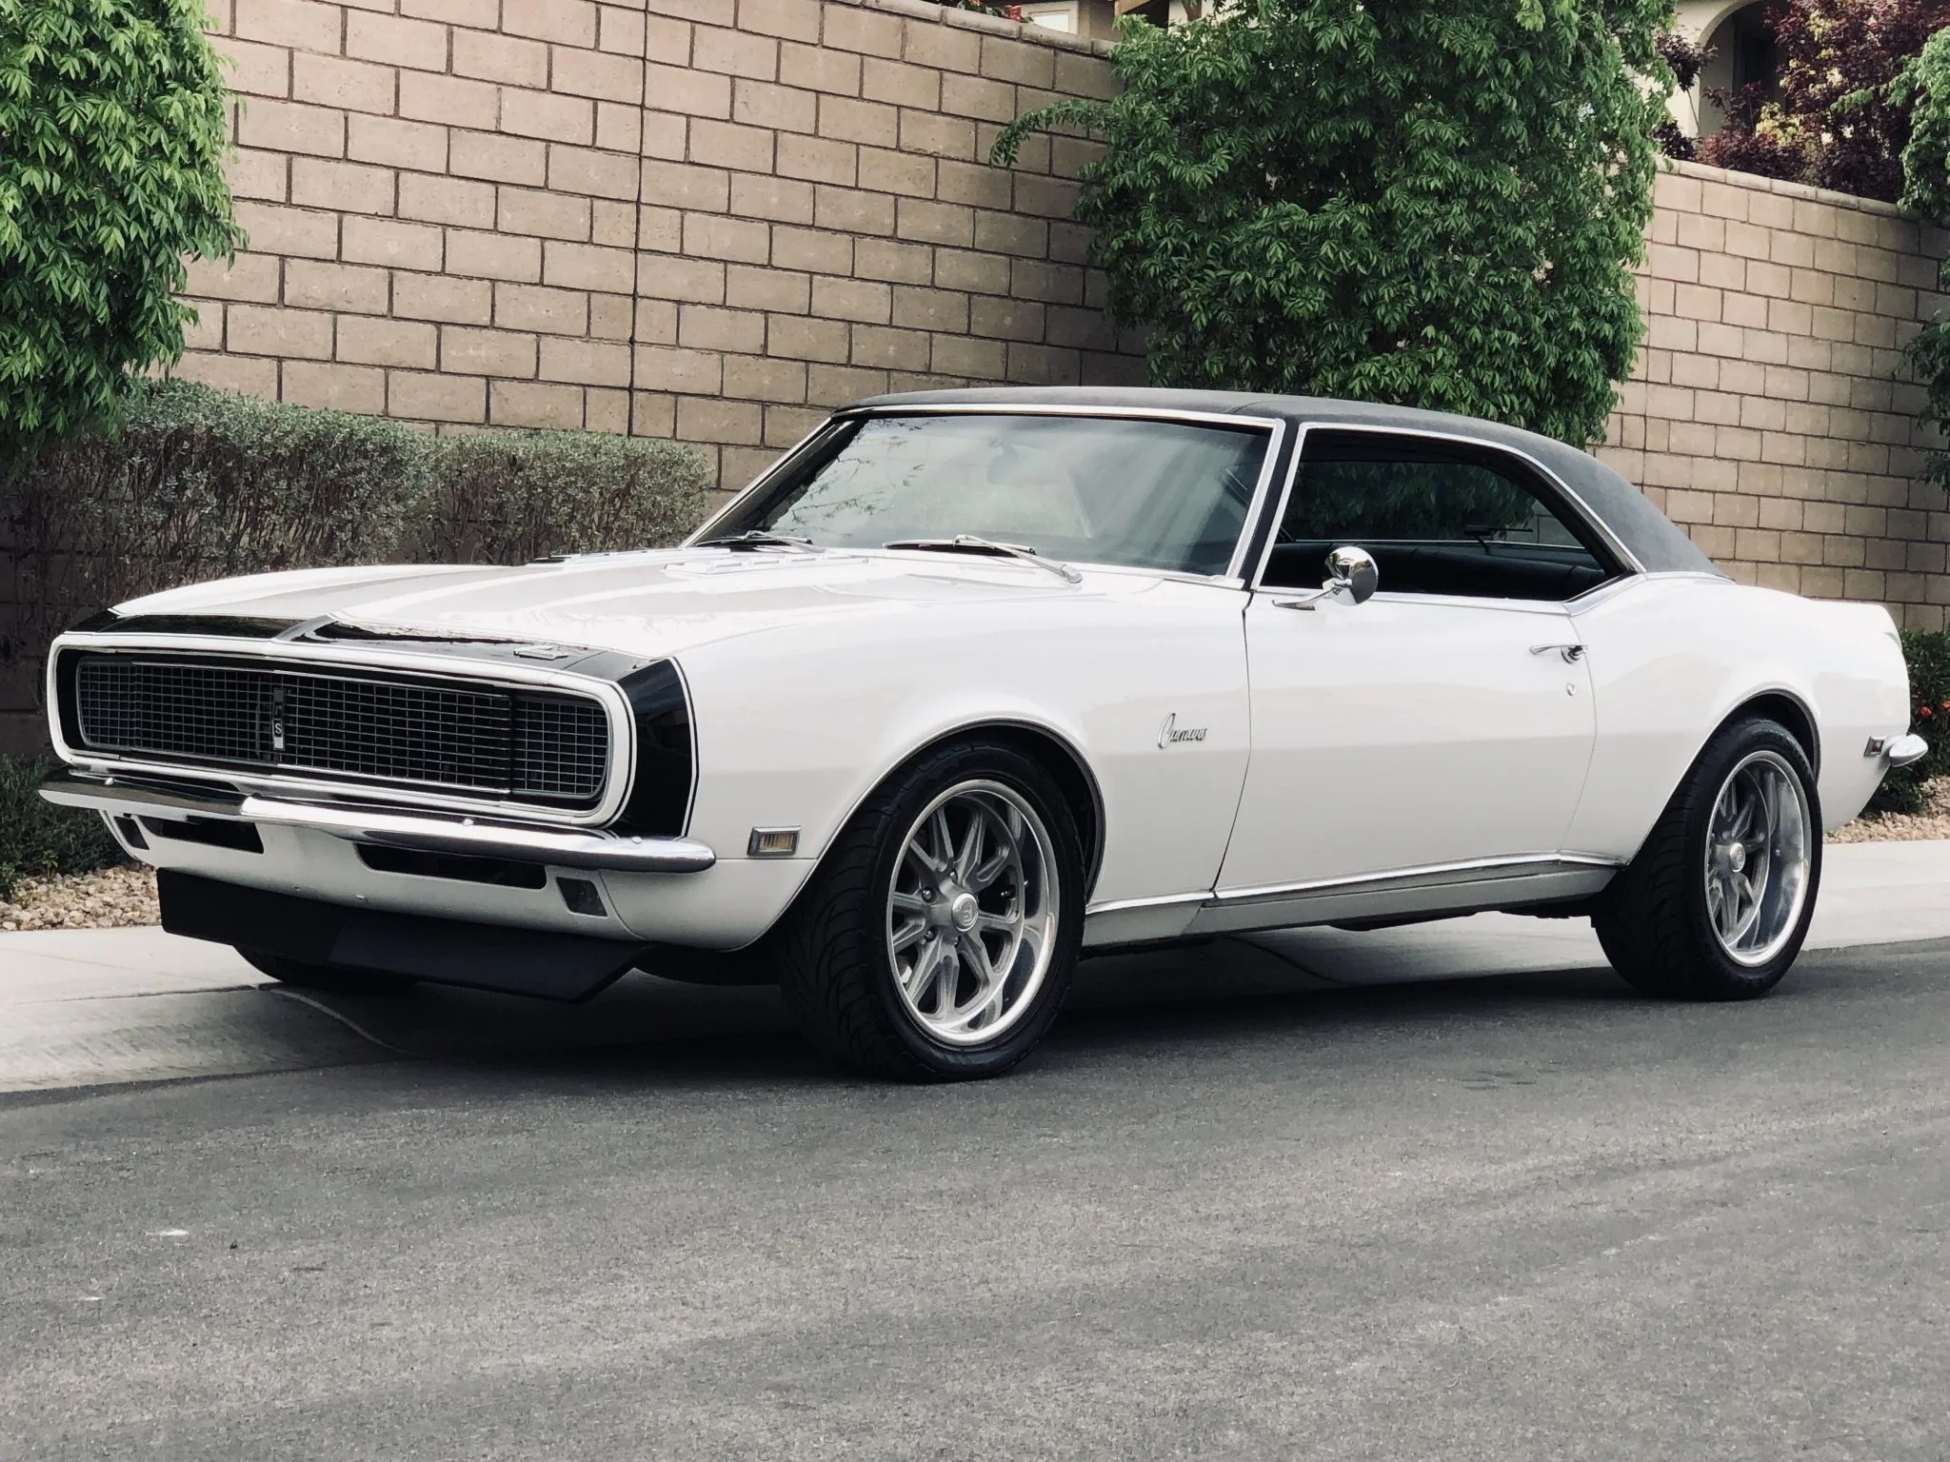 1968 Camaro Lightly Restomod Sold for Less Than You Might Think -  autoevolution